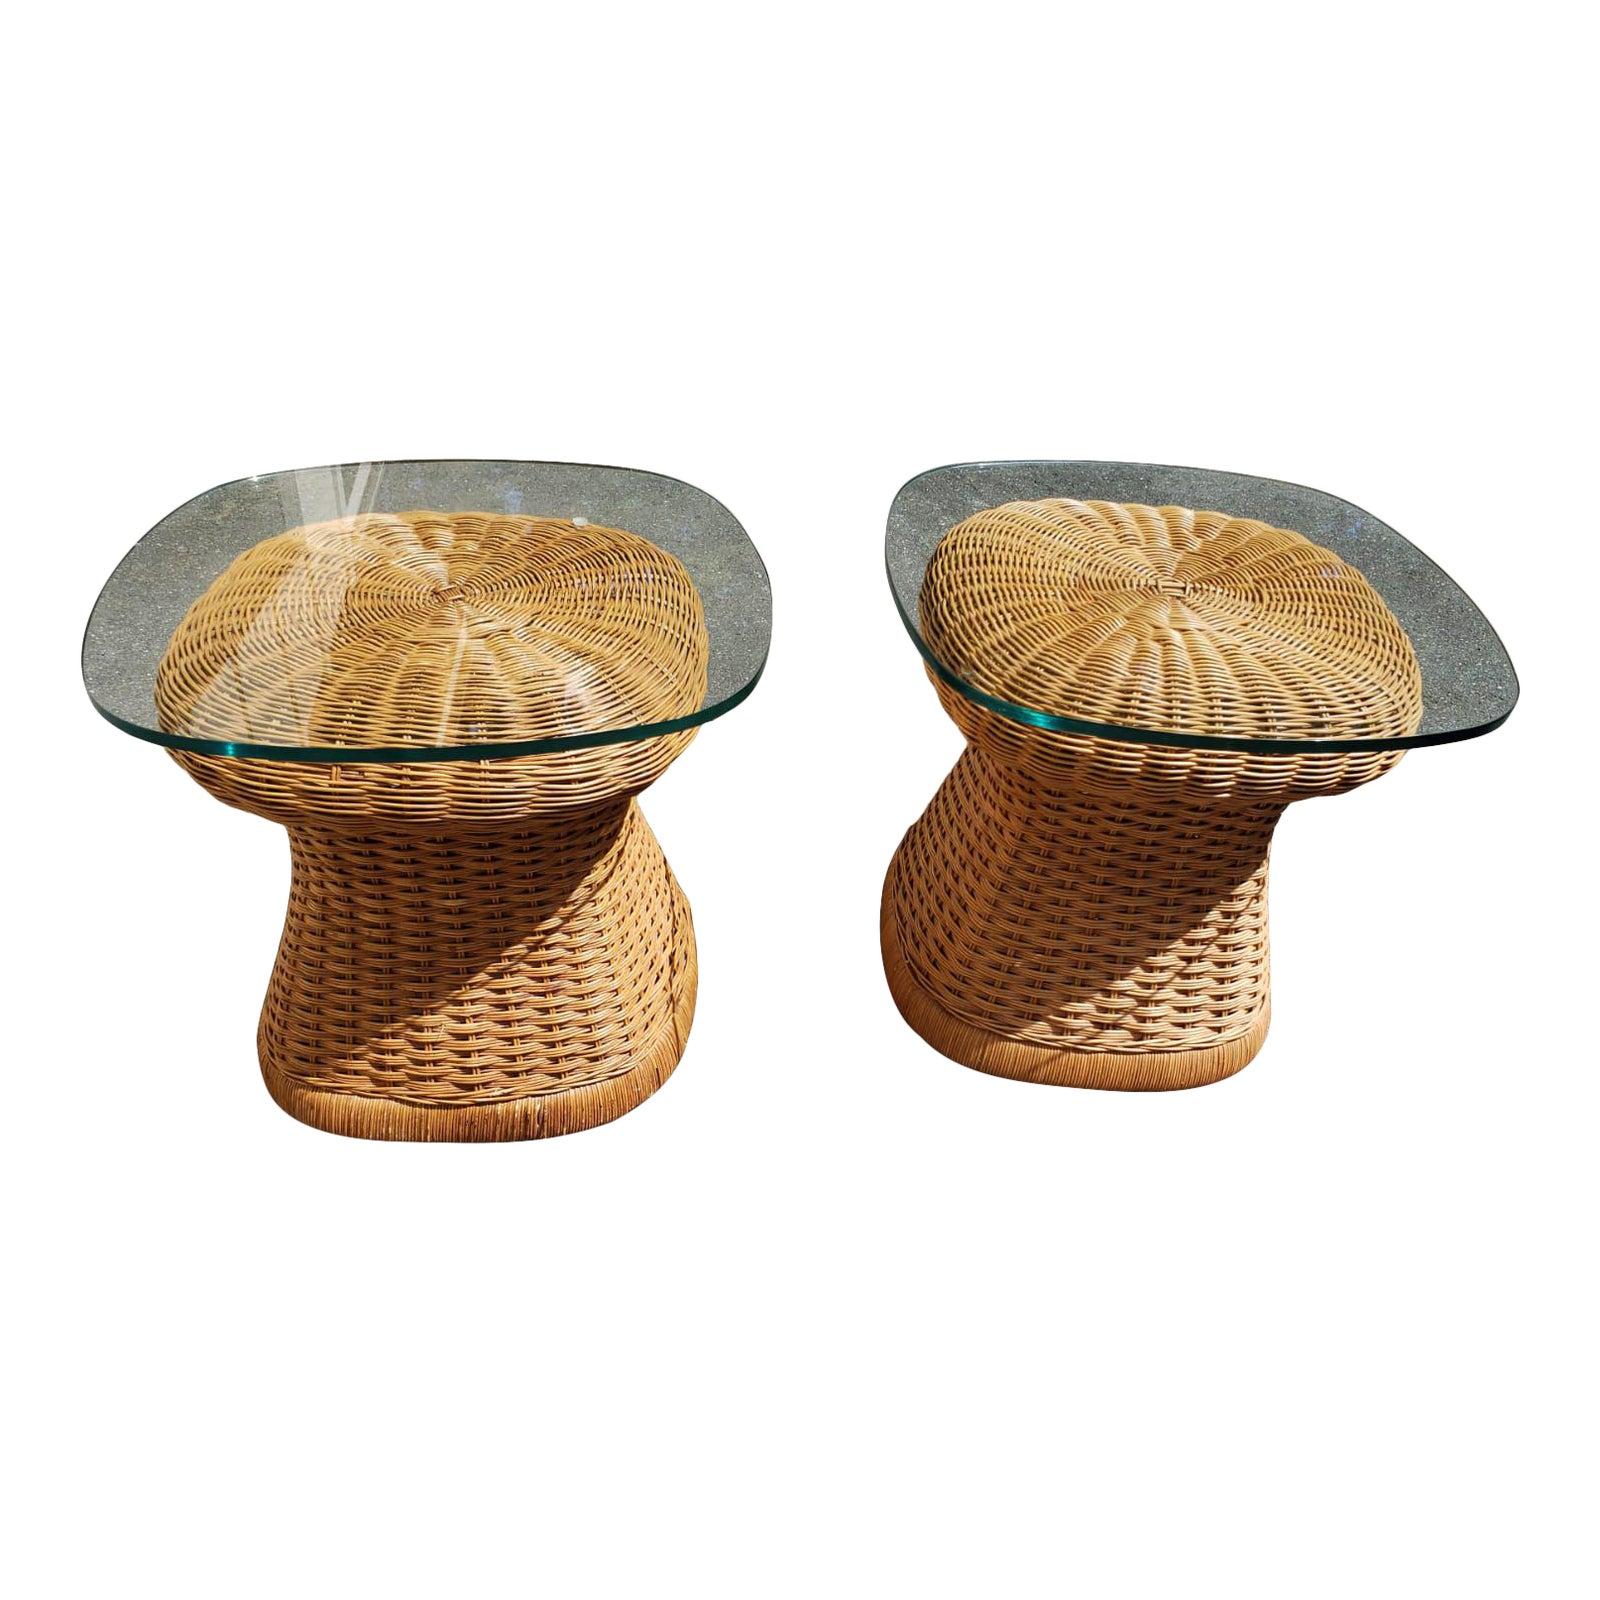 1960s Mid-Century Modern Wicker Side Tables With Tempered Glass Tops, a Pair